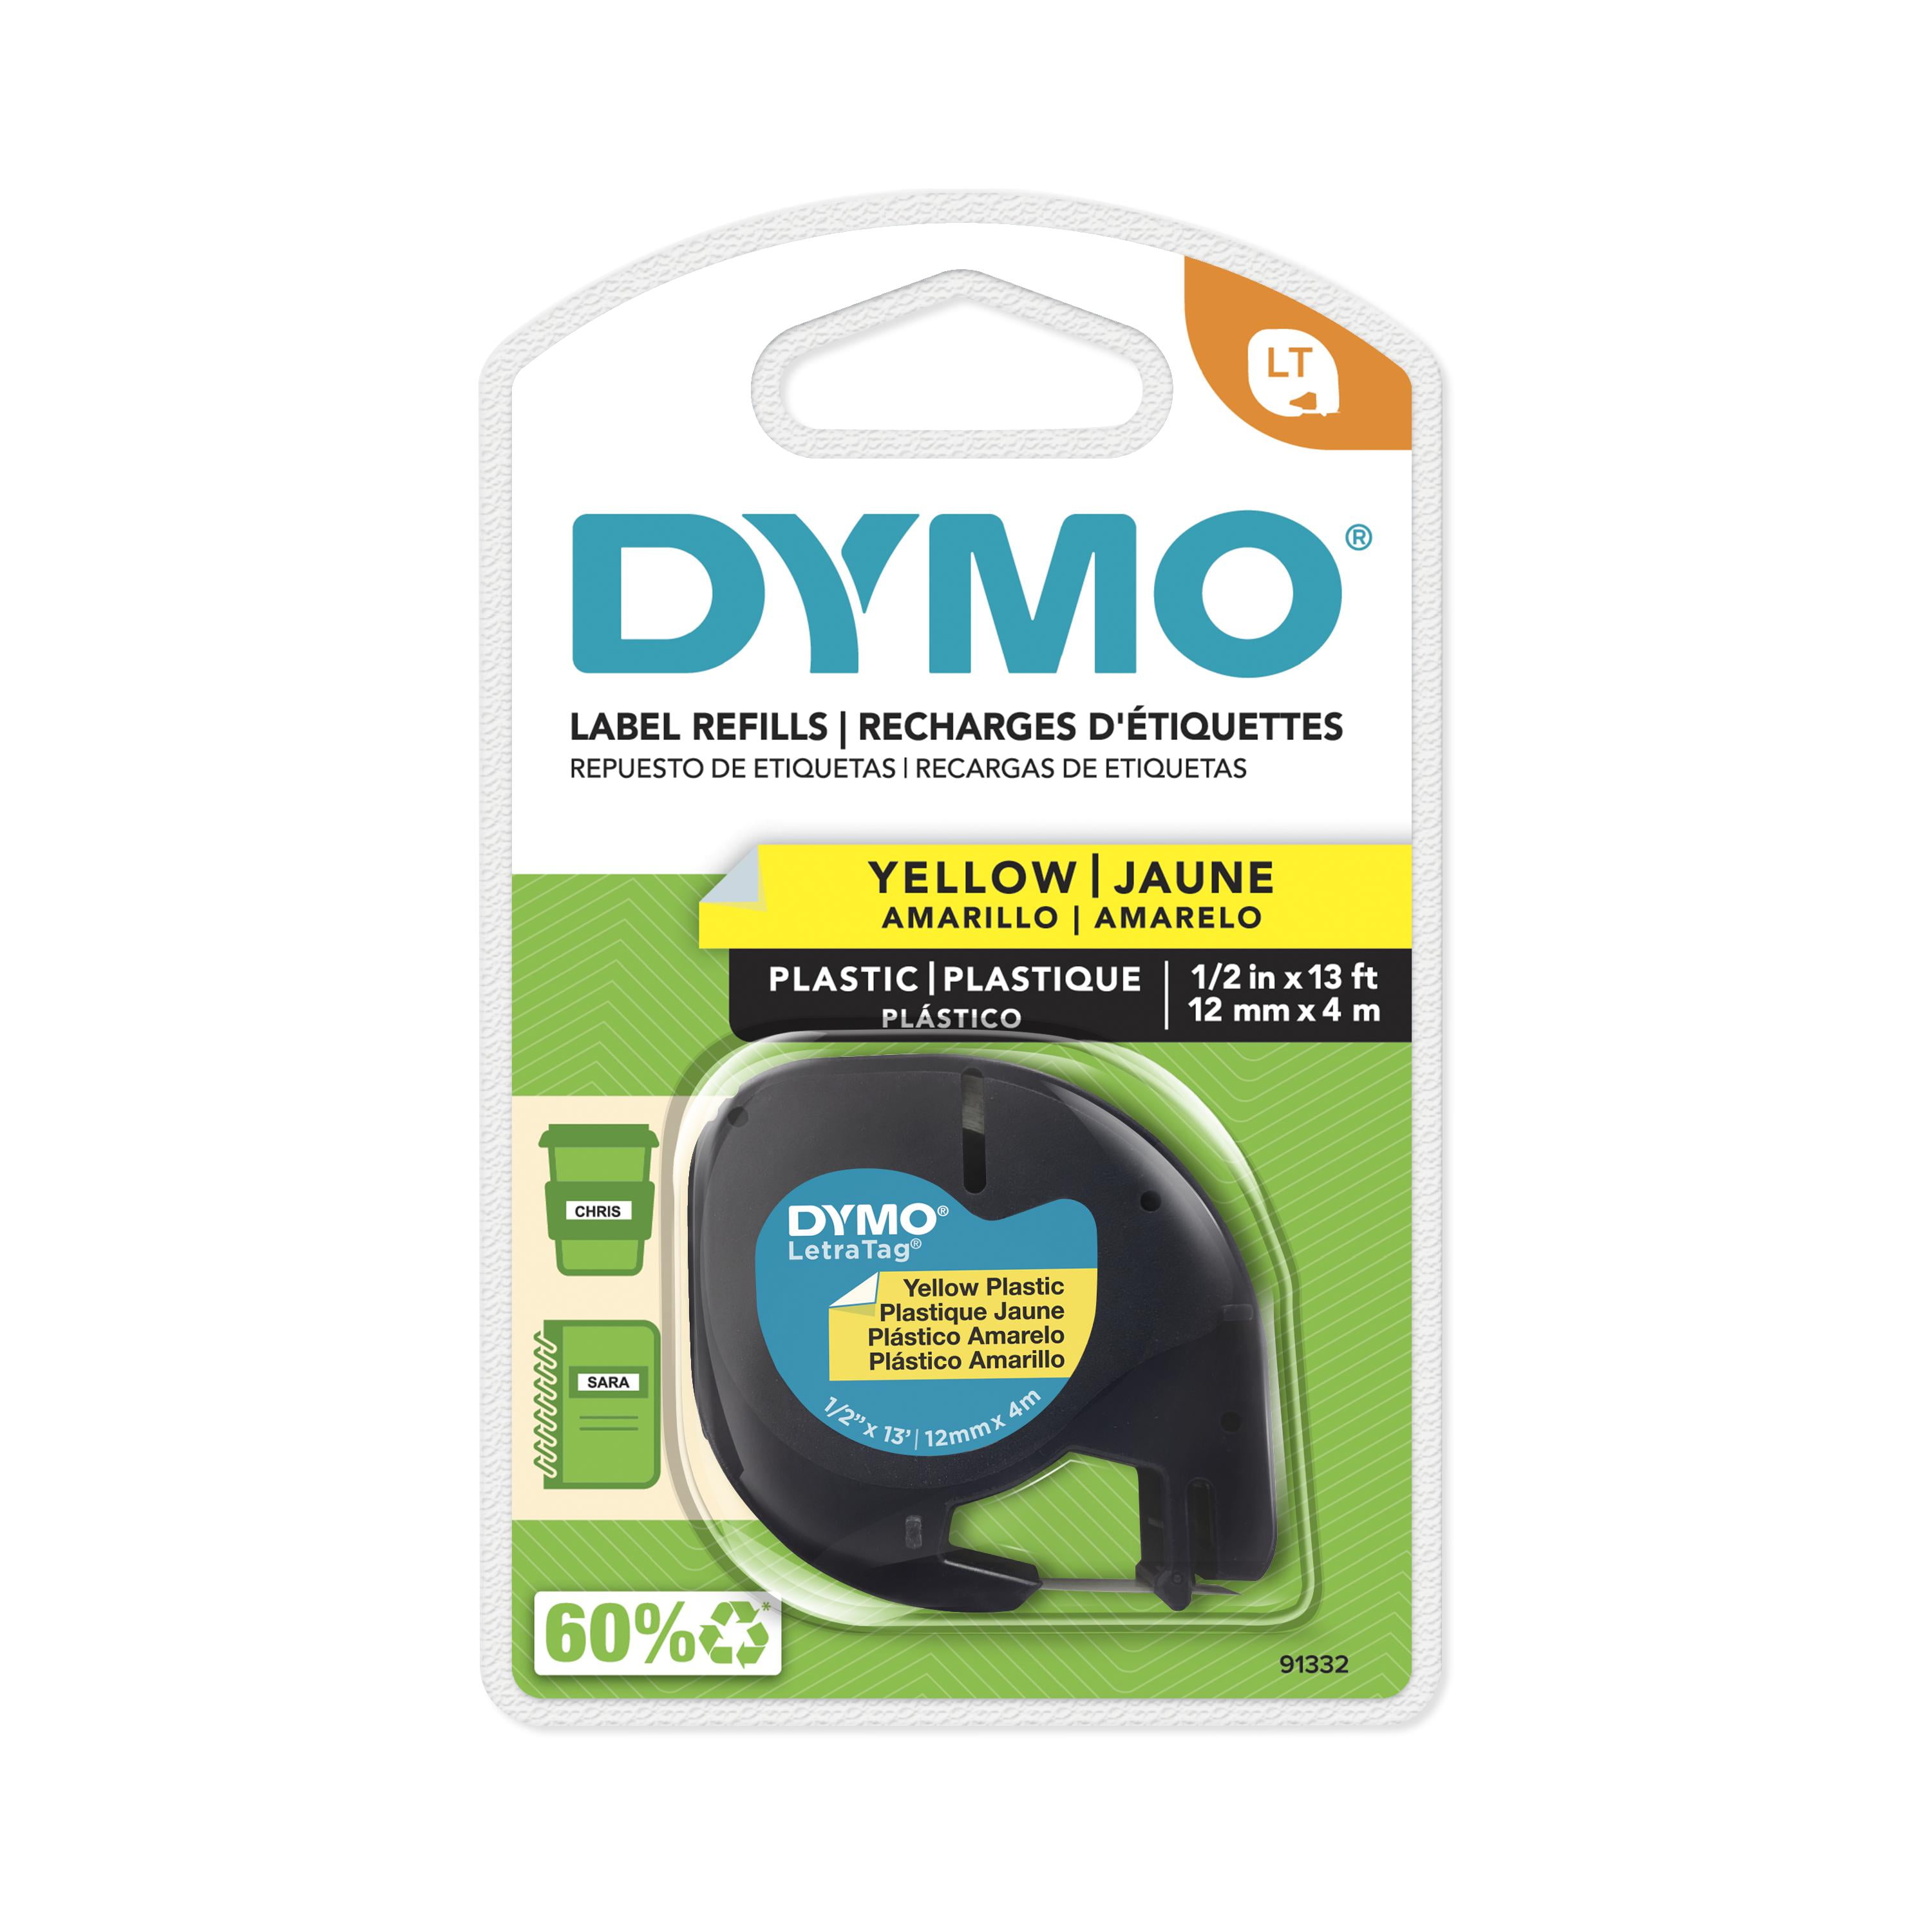 8-Pk/Pack 91331 91201 Letratag Refill Compatible for Dymo Label Maker Tape 1/2" 